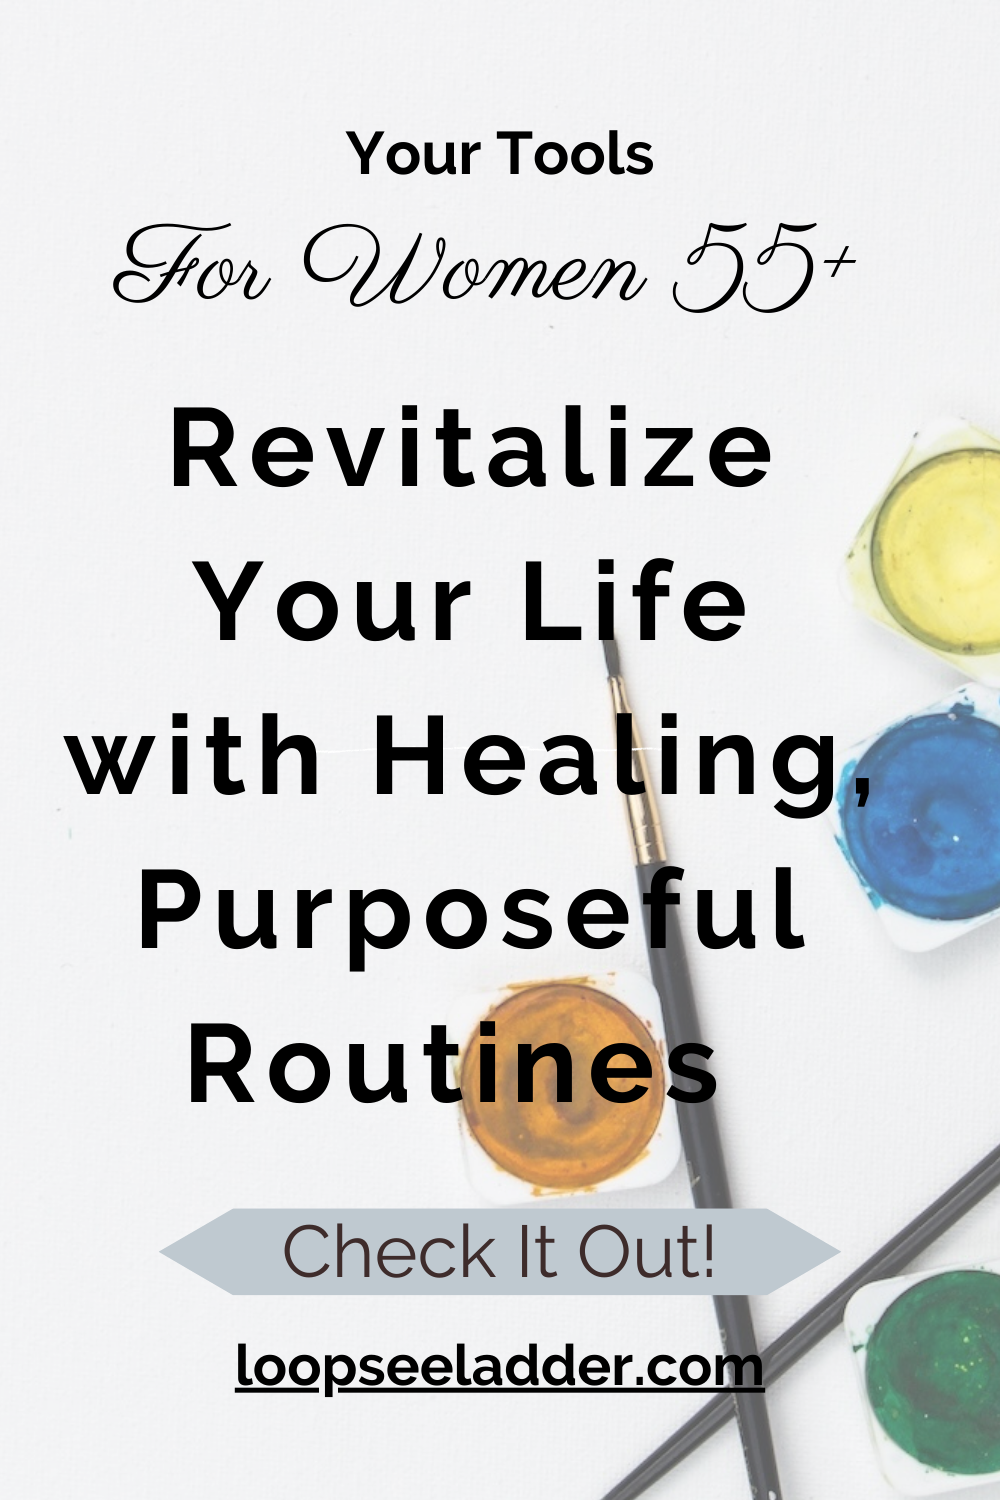 Revitalize Your Life: The Healing Power of Purposeful Routines for Women 55+